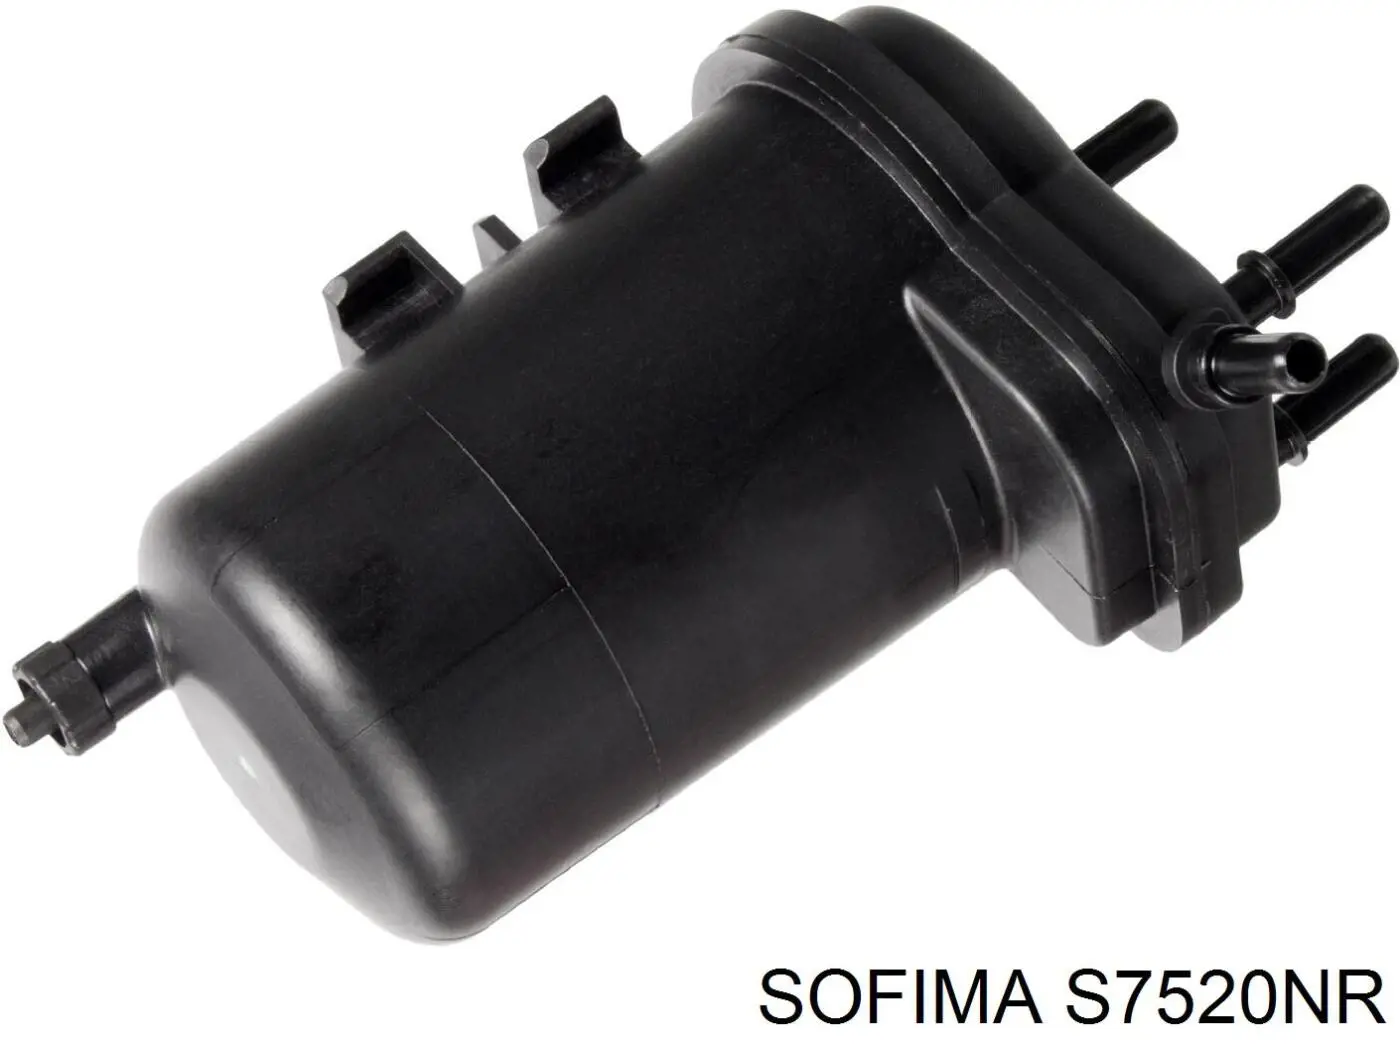 S 7520 NR Sofima filtro combustible